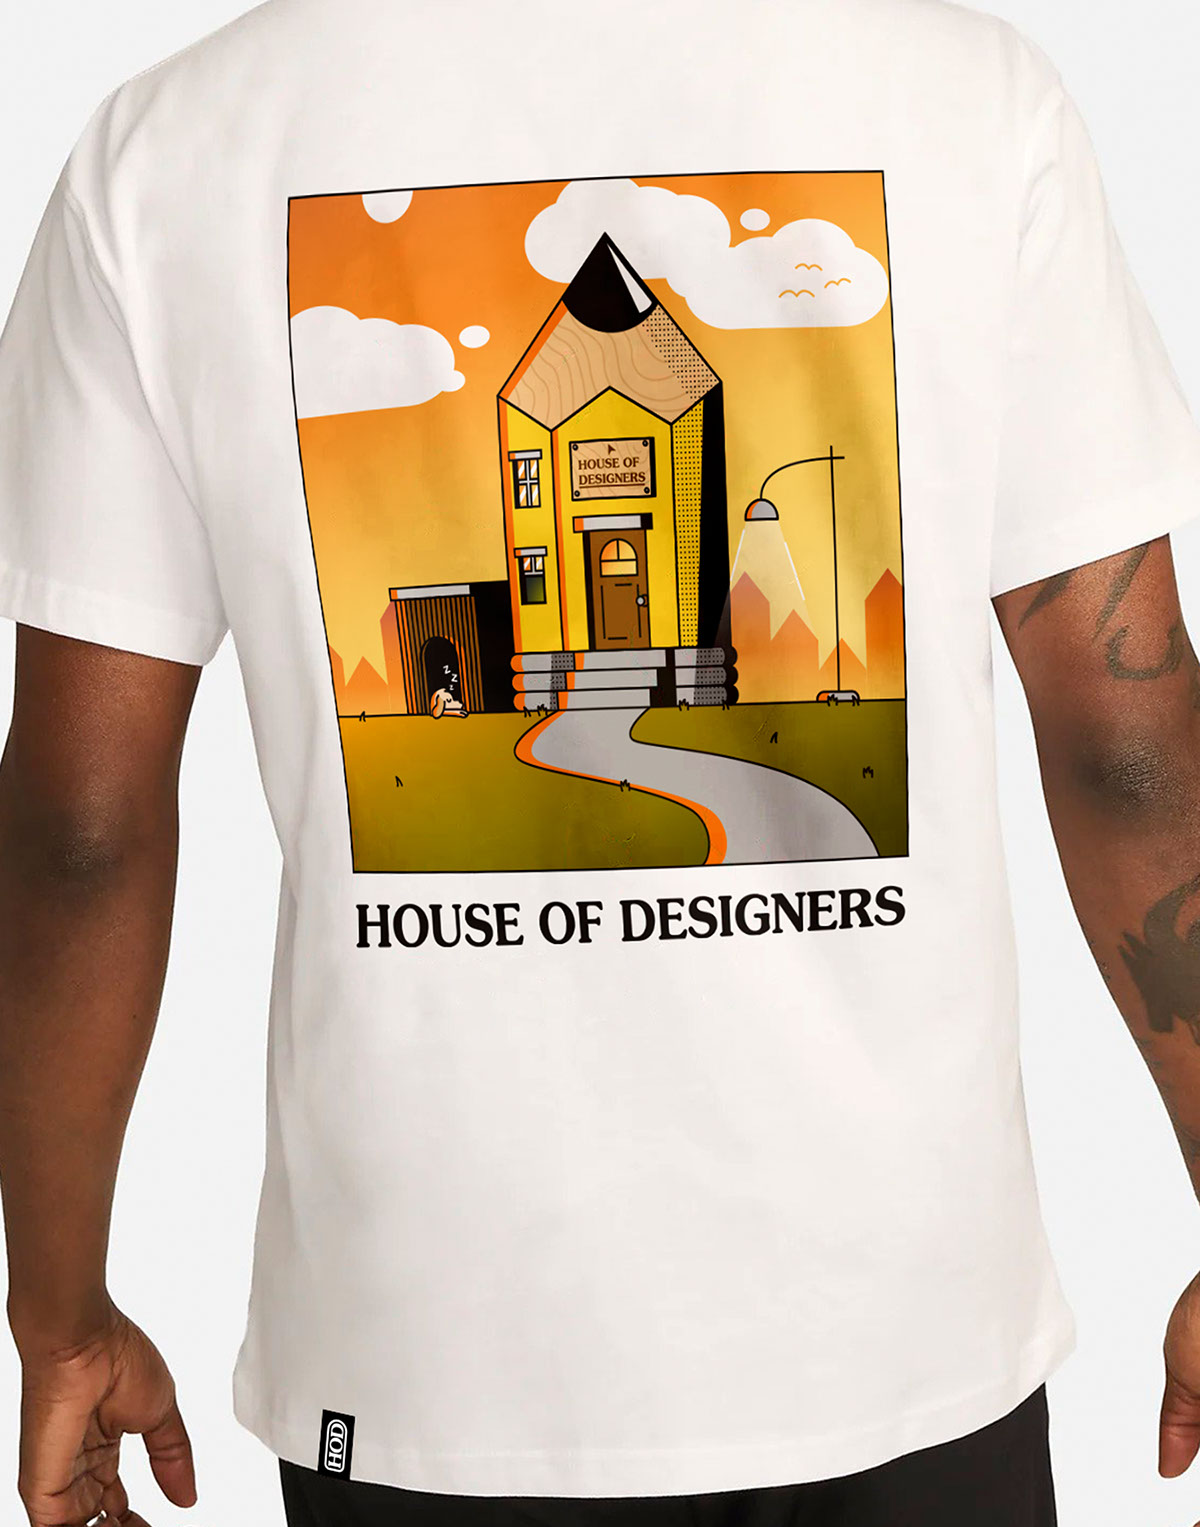 House of Designers rendition image